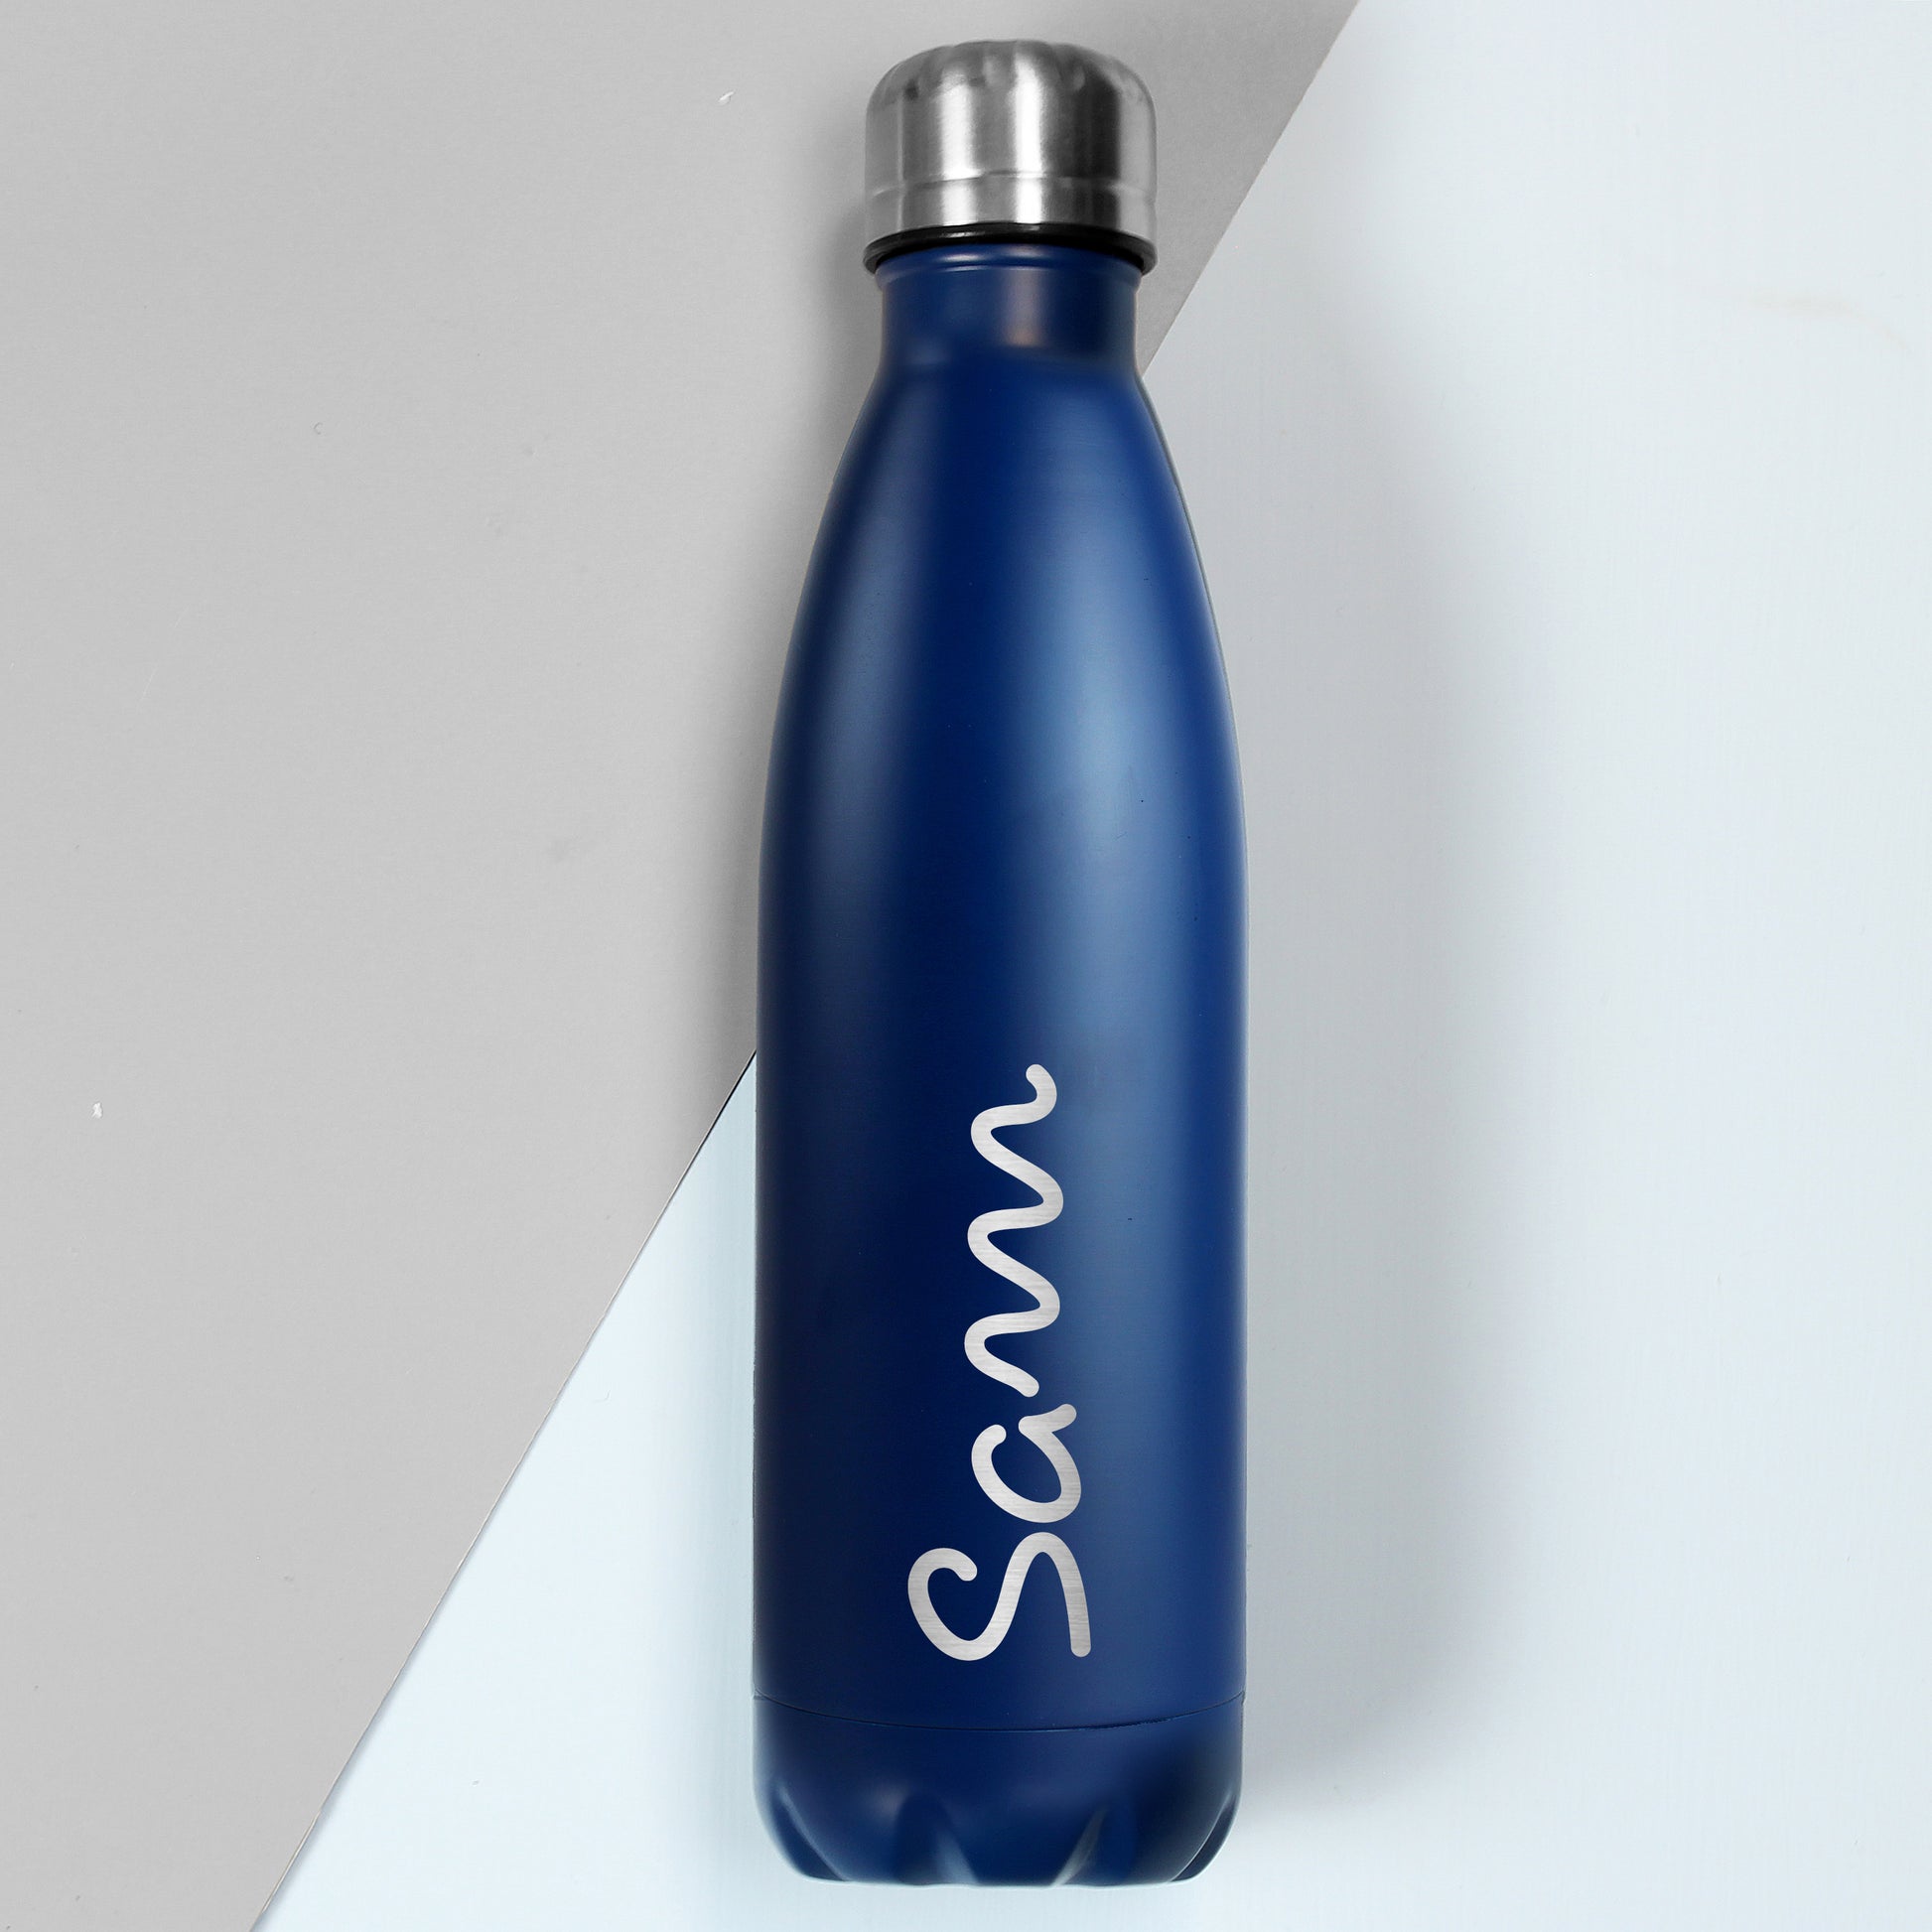 Navy insulated Island themed drinks bottle - Lilybet loves